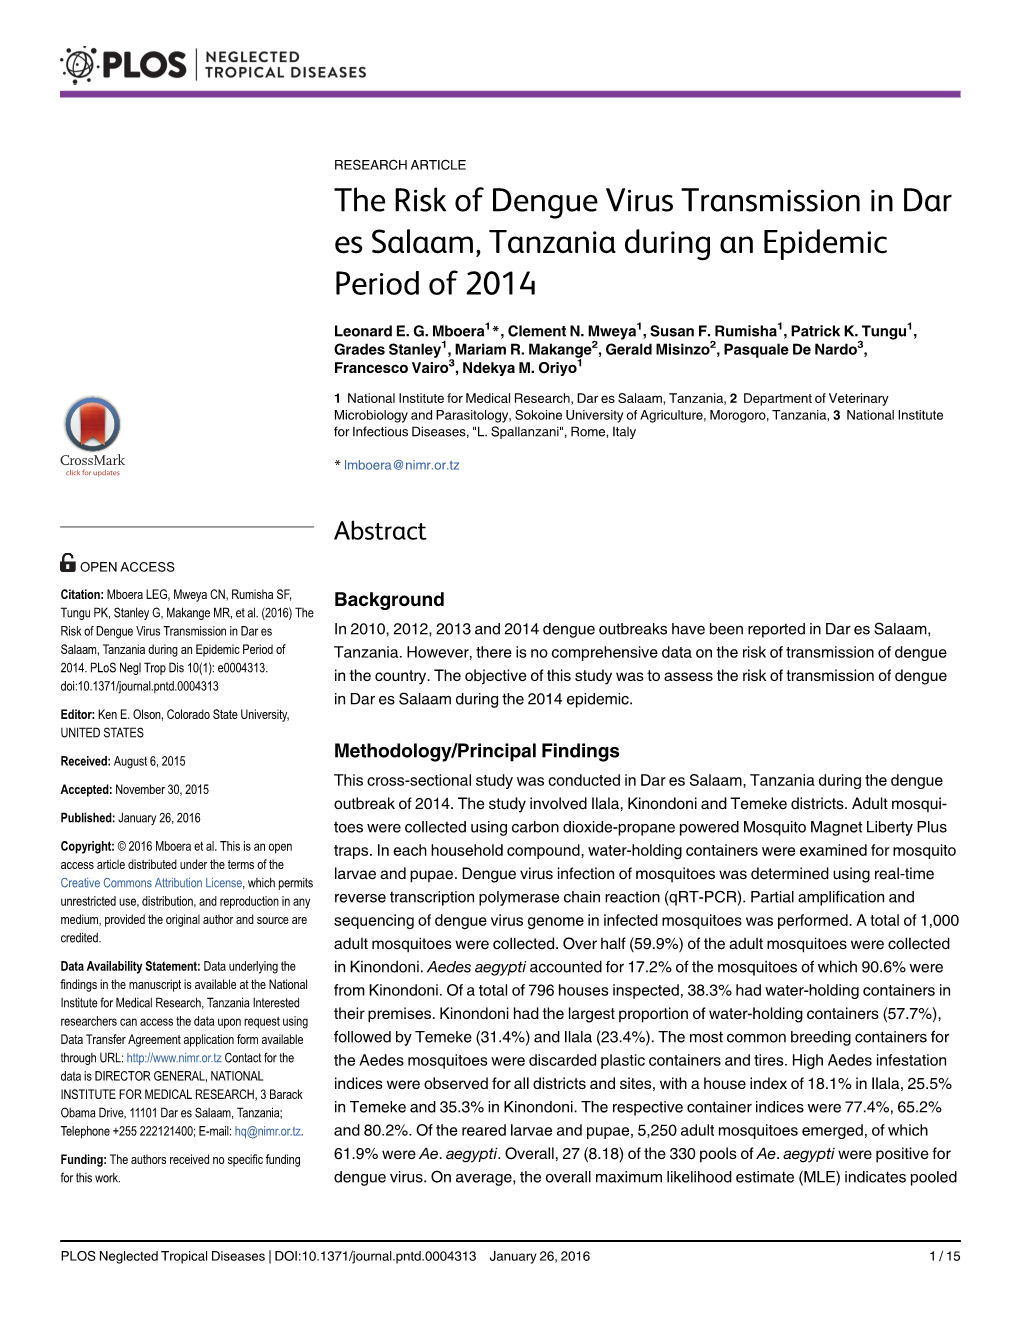 The Risk of Dengue Virus Transmission in Dar Es Salaam, Tanzania During an Epidemic Period of 2014